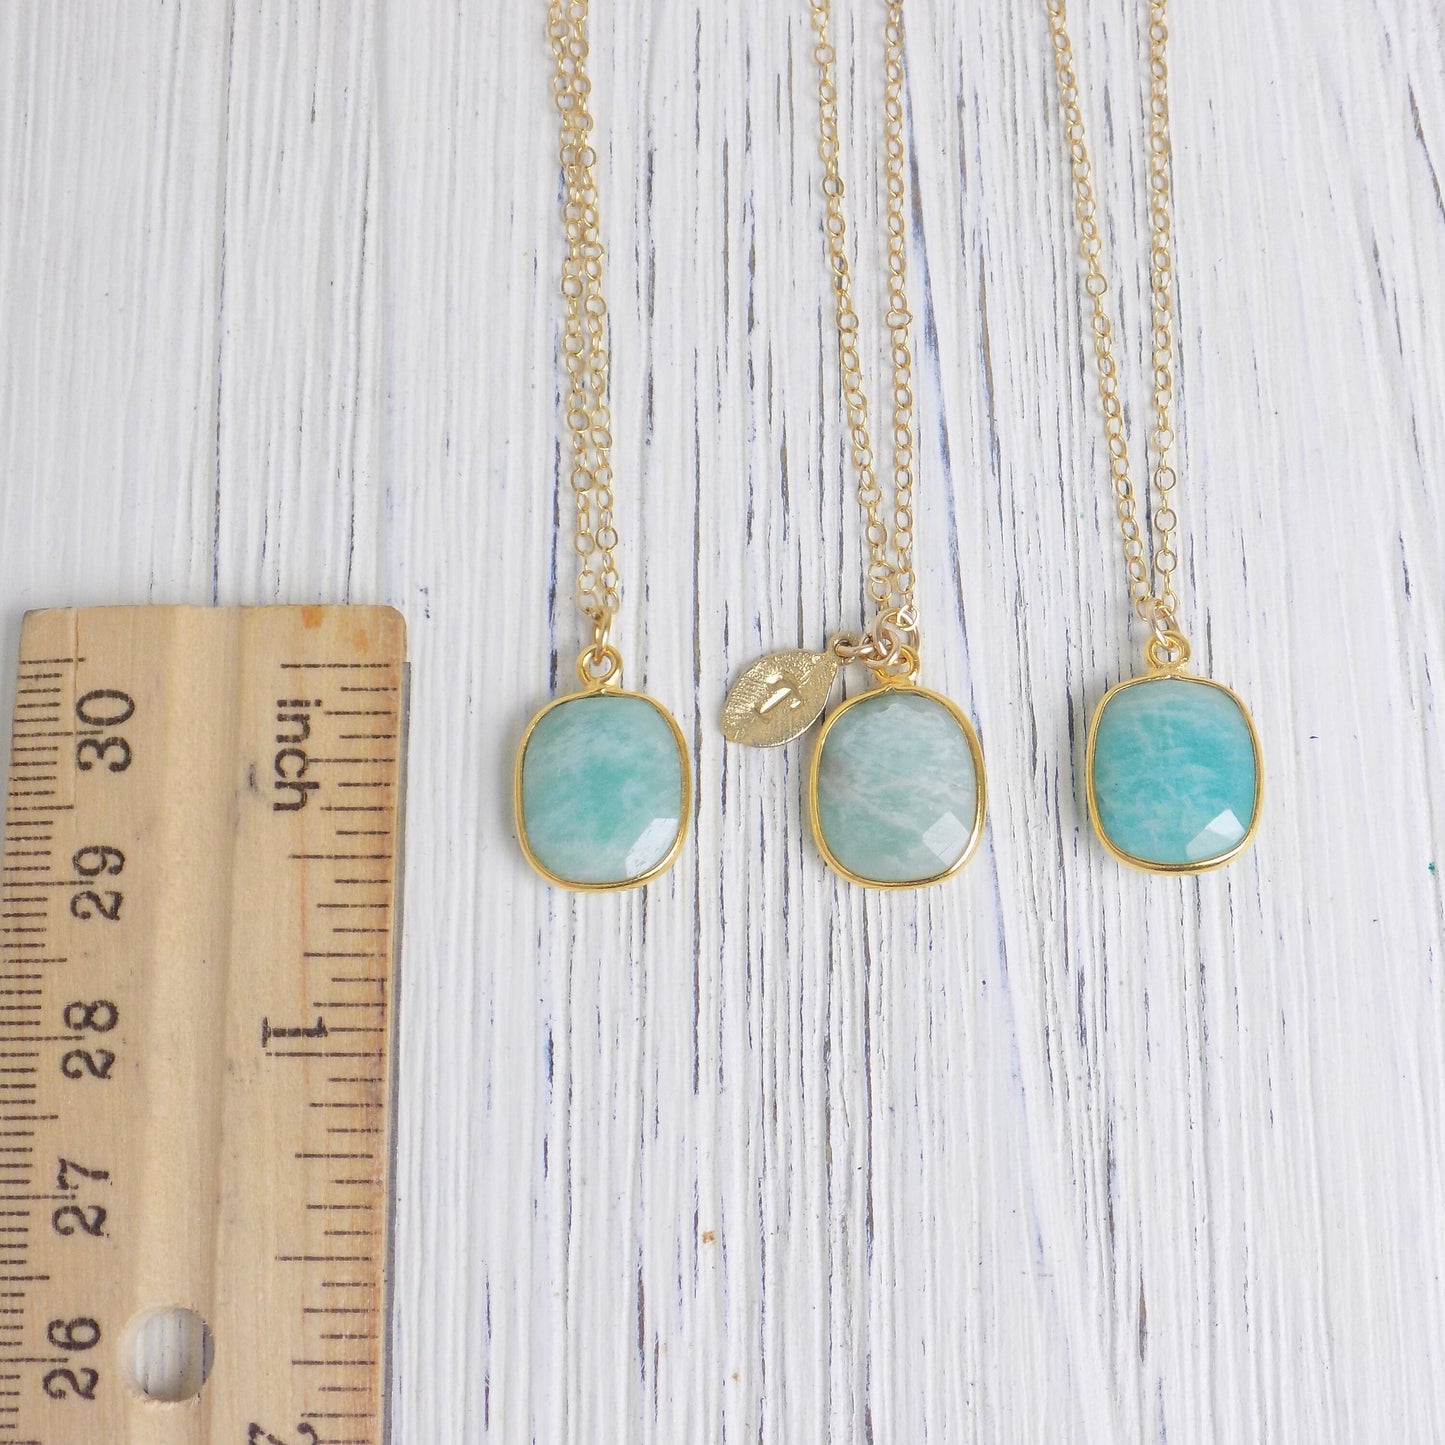 Personalized Gifts For Her, Amazonite Necklace on 14K Gold Filled Chain with Custom Initial Charm, M6-37